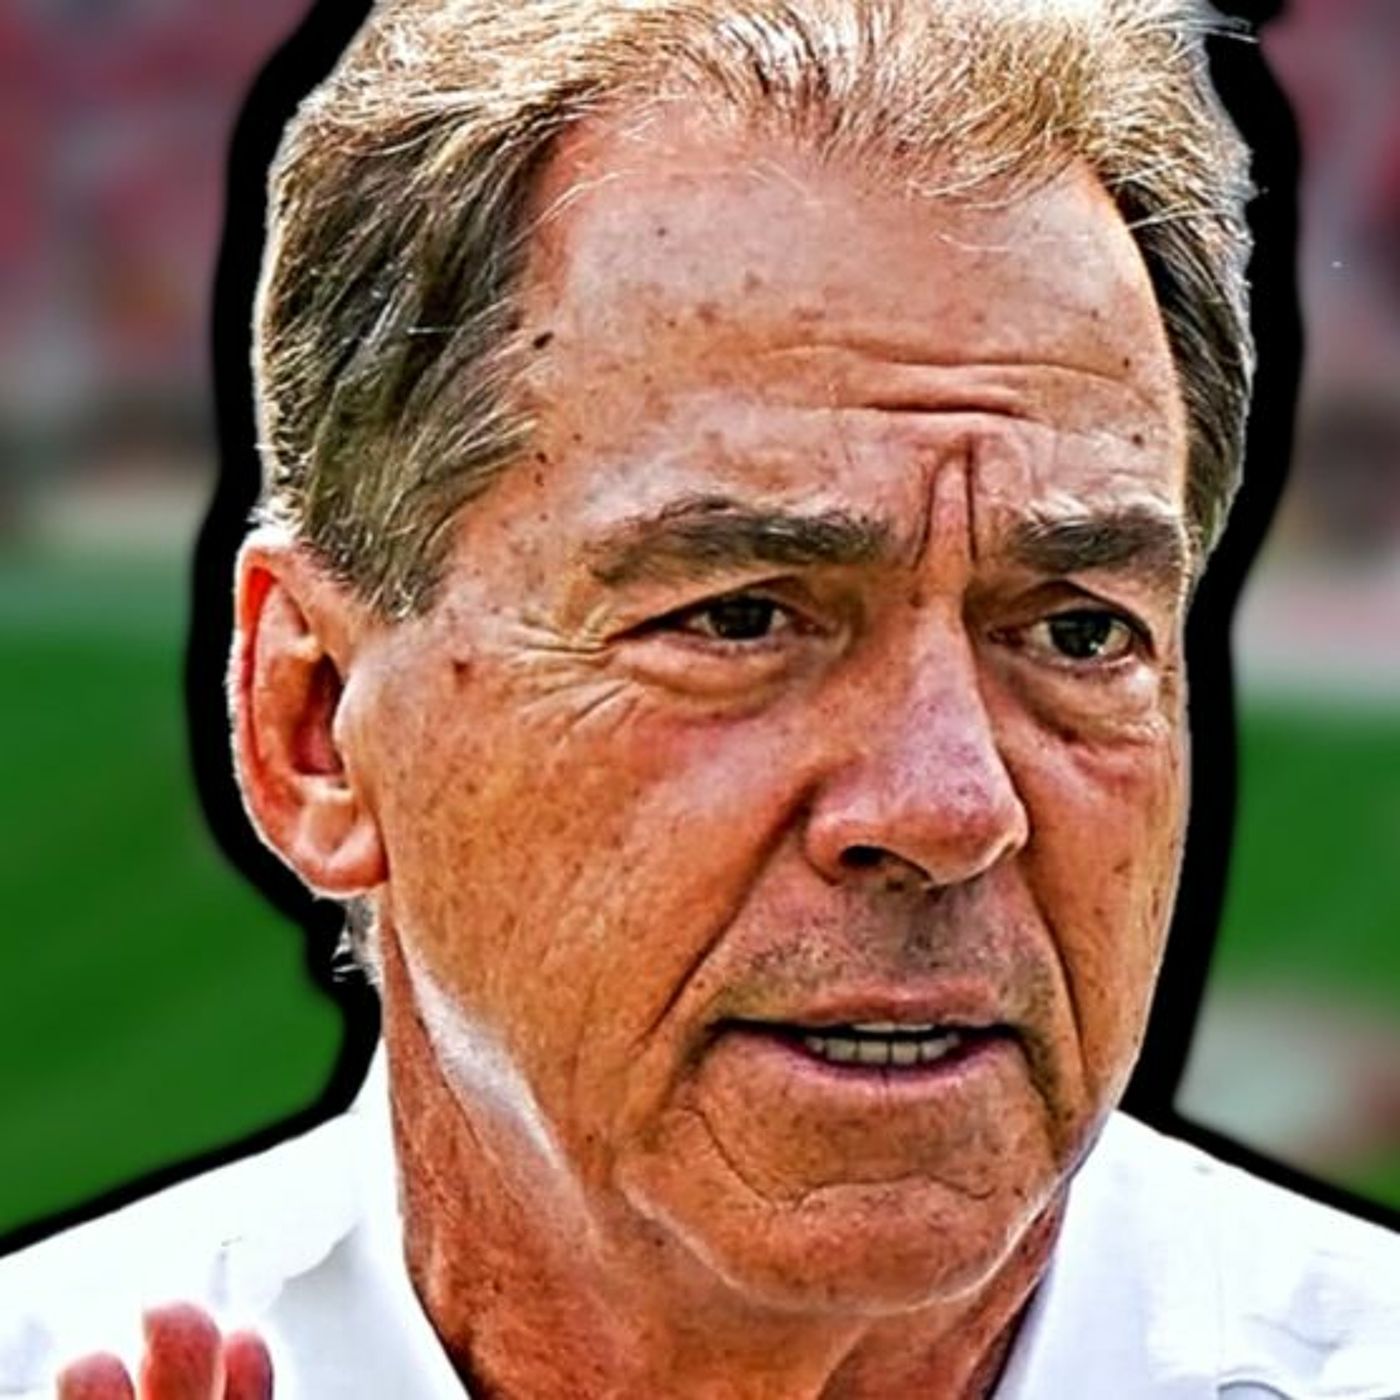 Bama has an elite RB duo, Jalen Hurts update, Saban is the undisputed G.O.A.T. of college football